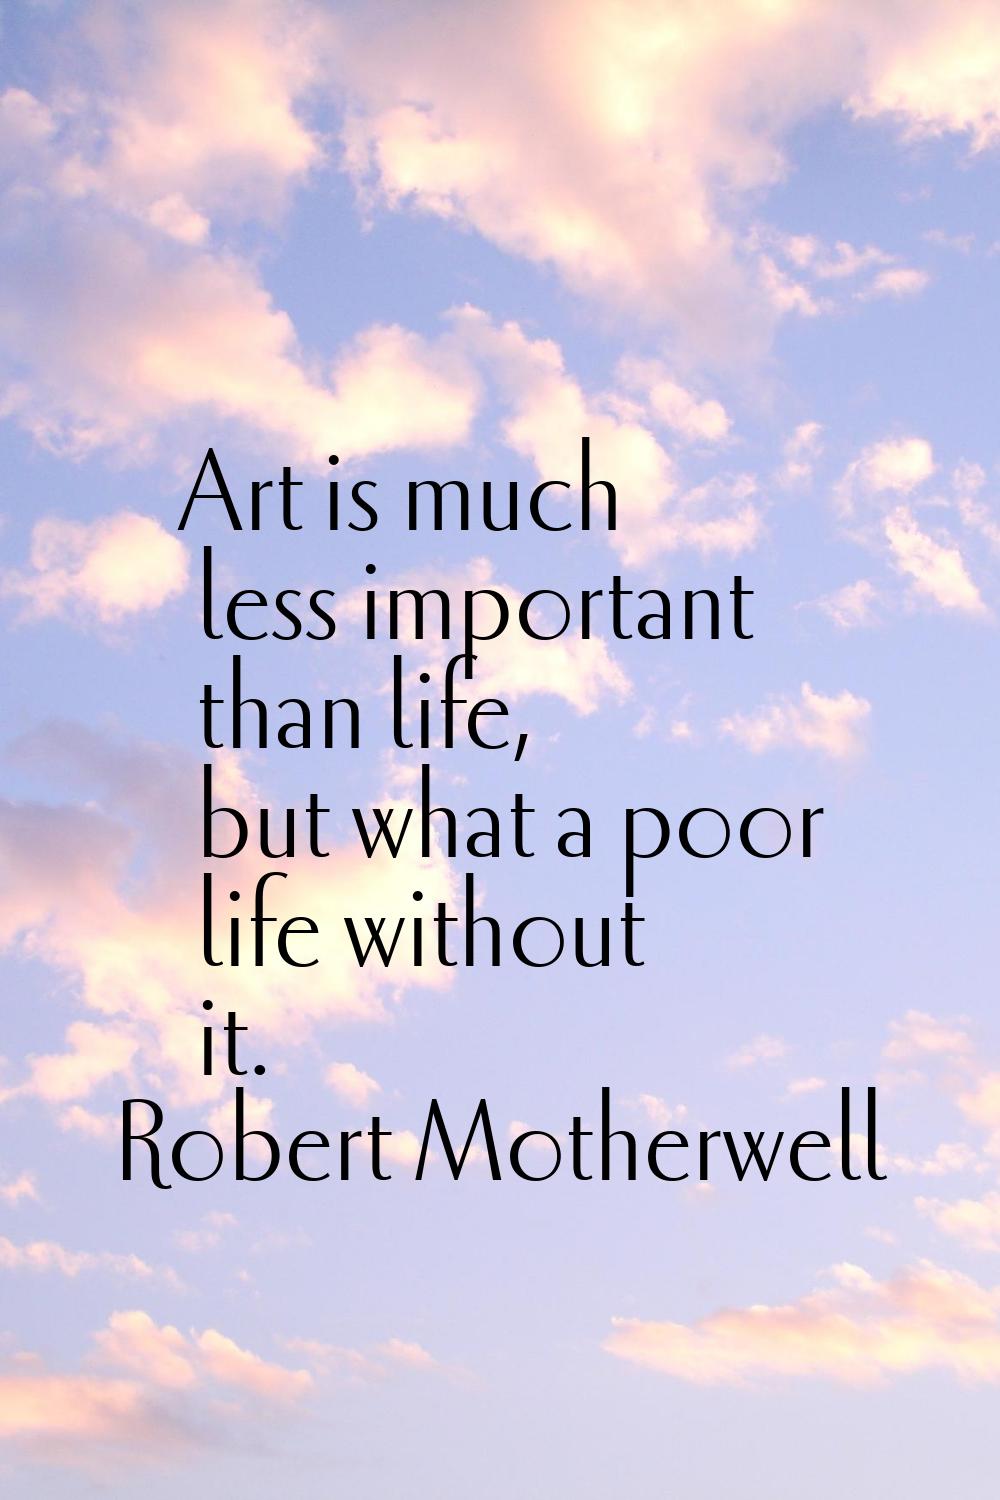 Art is much less important than life, but what a poor life without it.